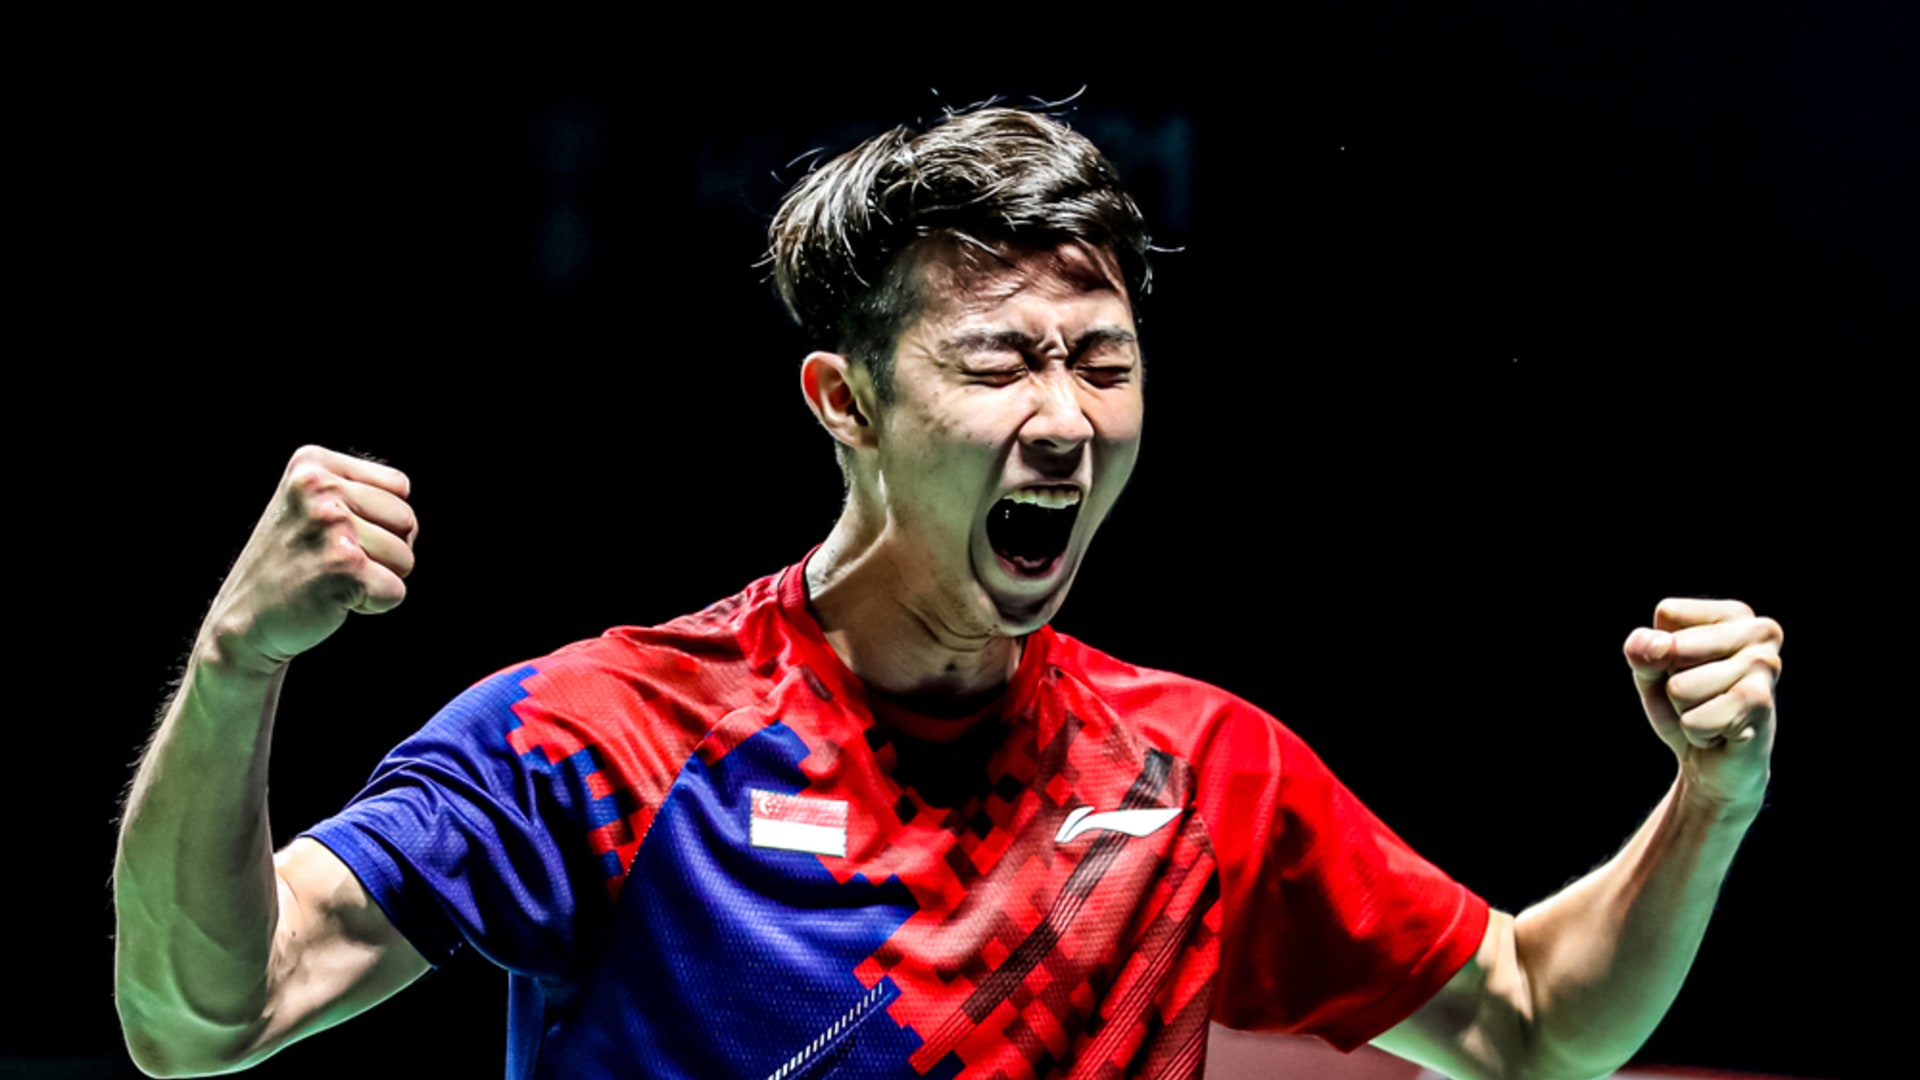 BWF World Championships 2021 finals Get badminton updates, live scores and results